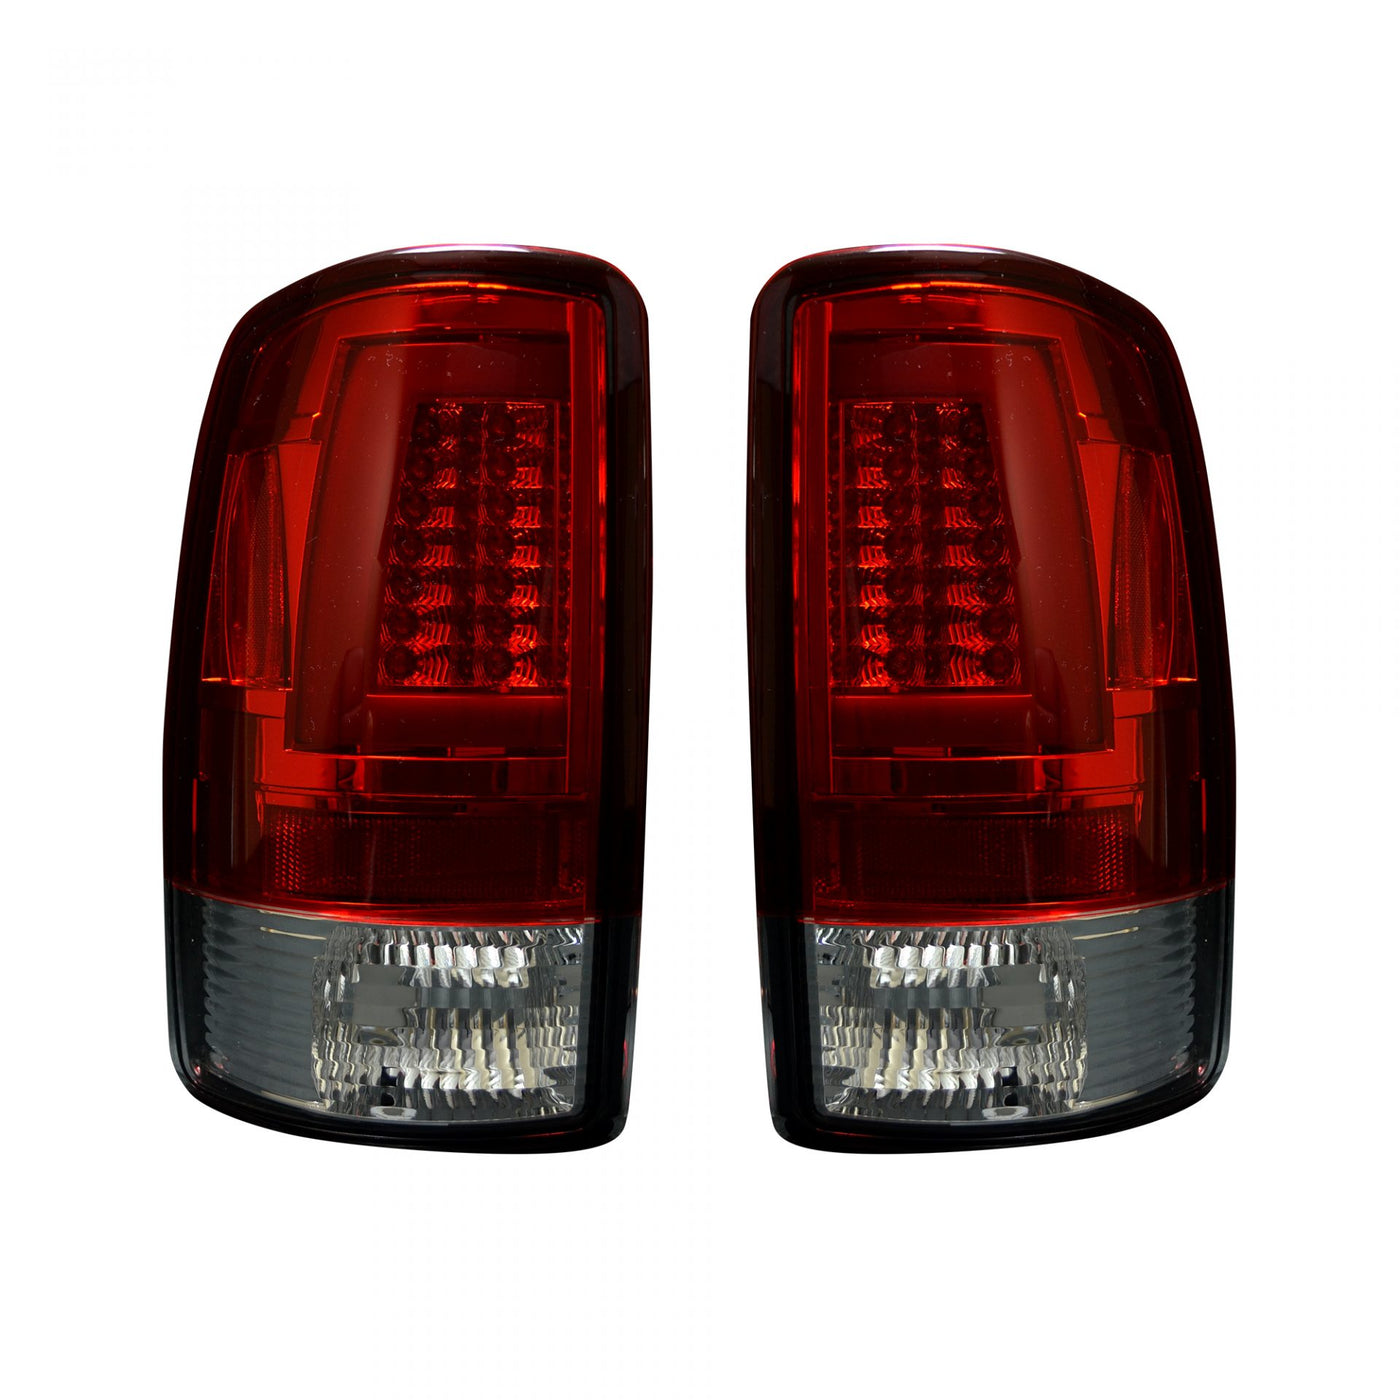 Chevy Tahoe Tail Lights, Chevy Suburban Tail Lights, GMC Yukon Tail Lights, GMC Denali Tail Lights, Tail Lights, Red Tail Lights, Recon Tail Lights